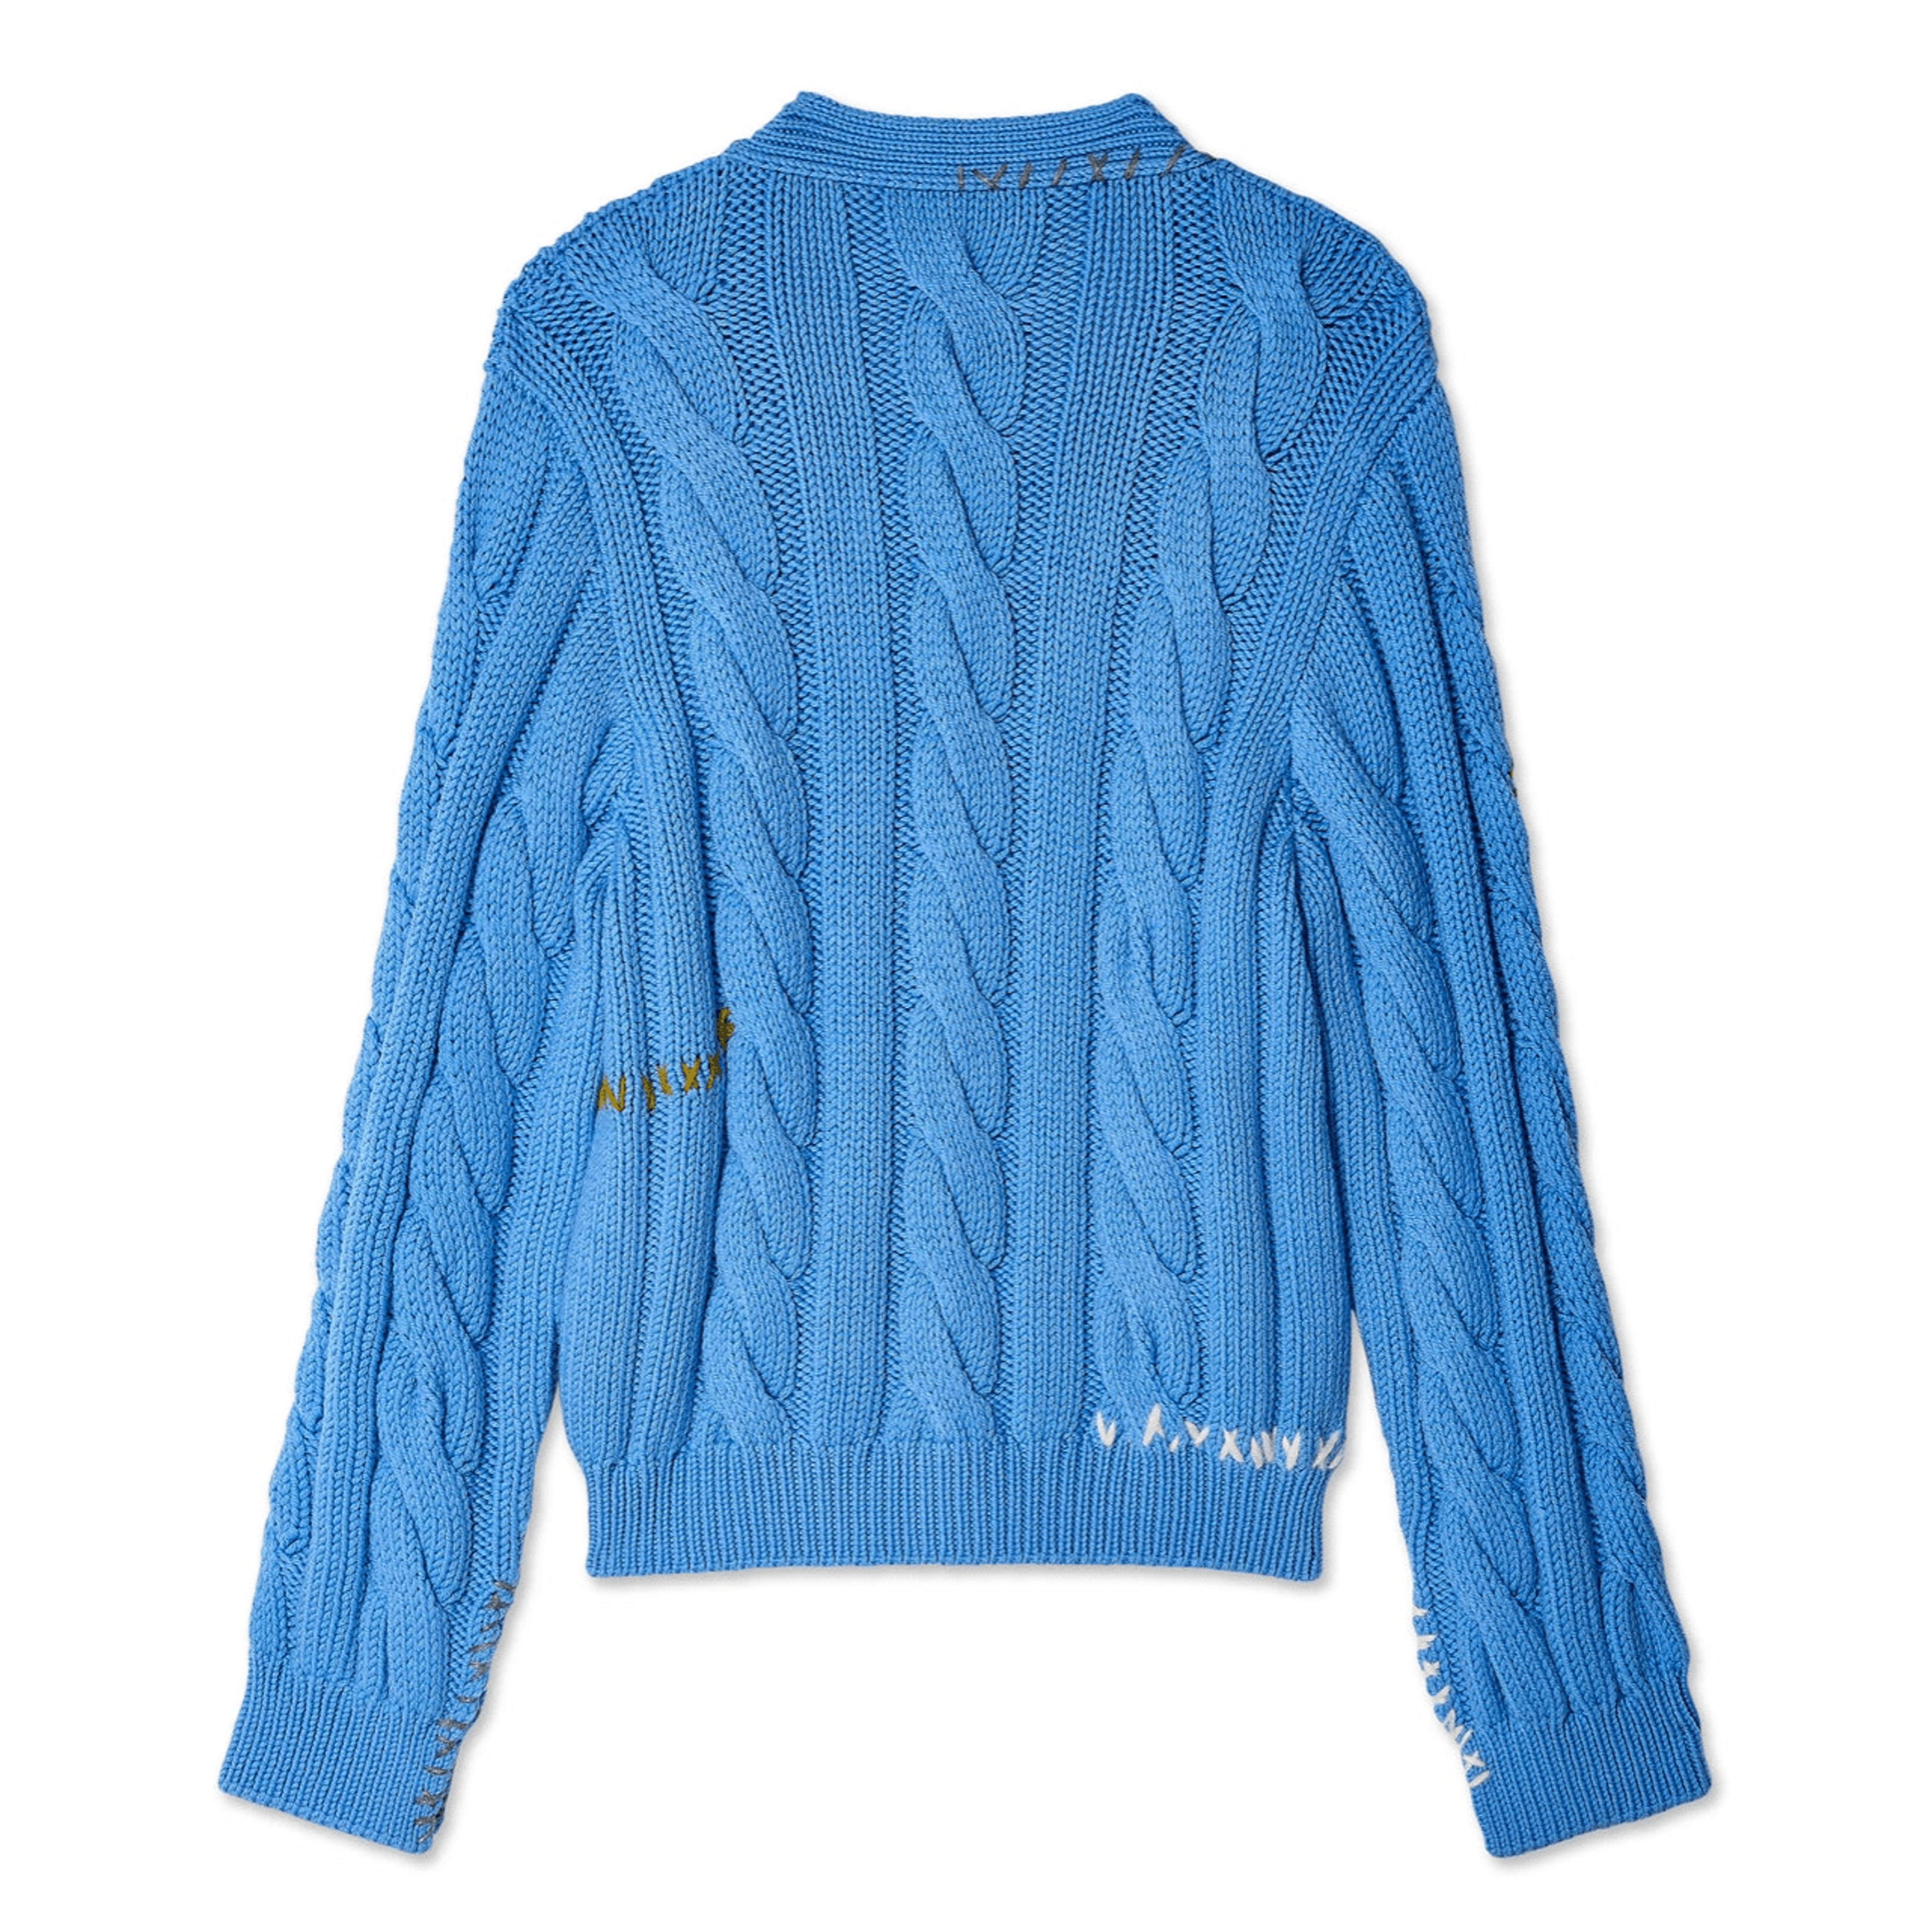 Alternate View 1 of Marni Cable Knit Cardigan Sweater Iris Blue